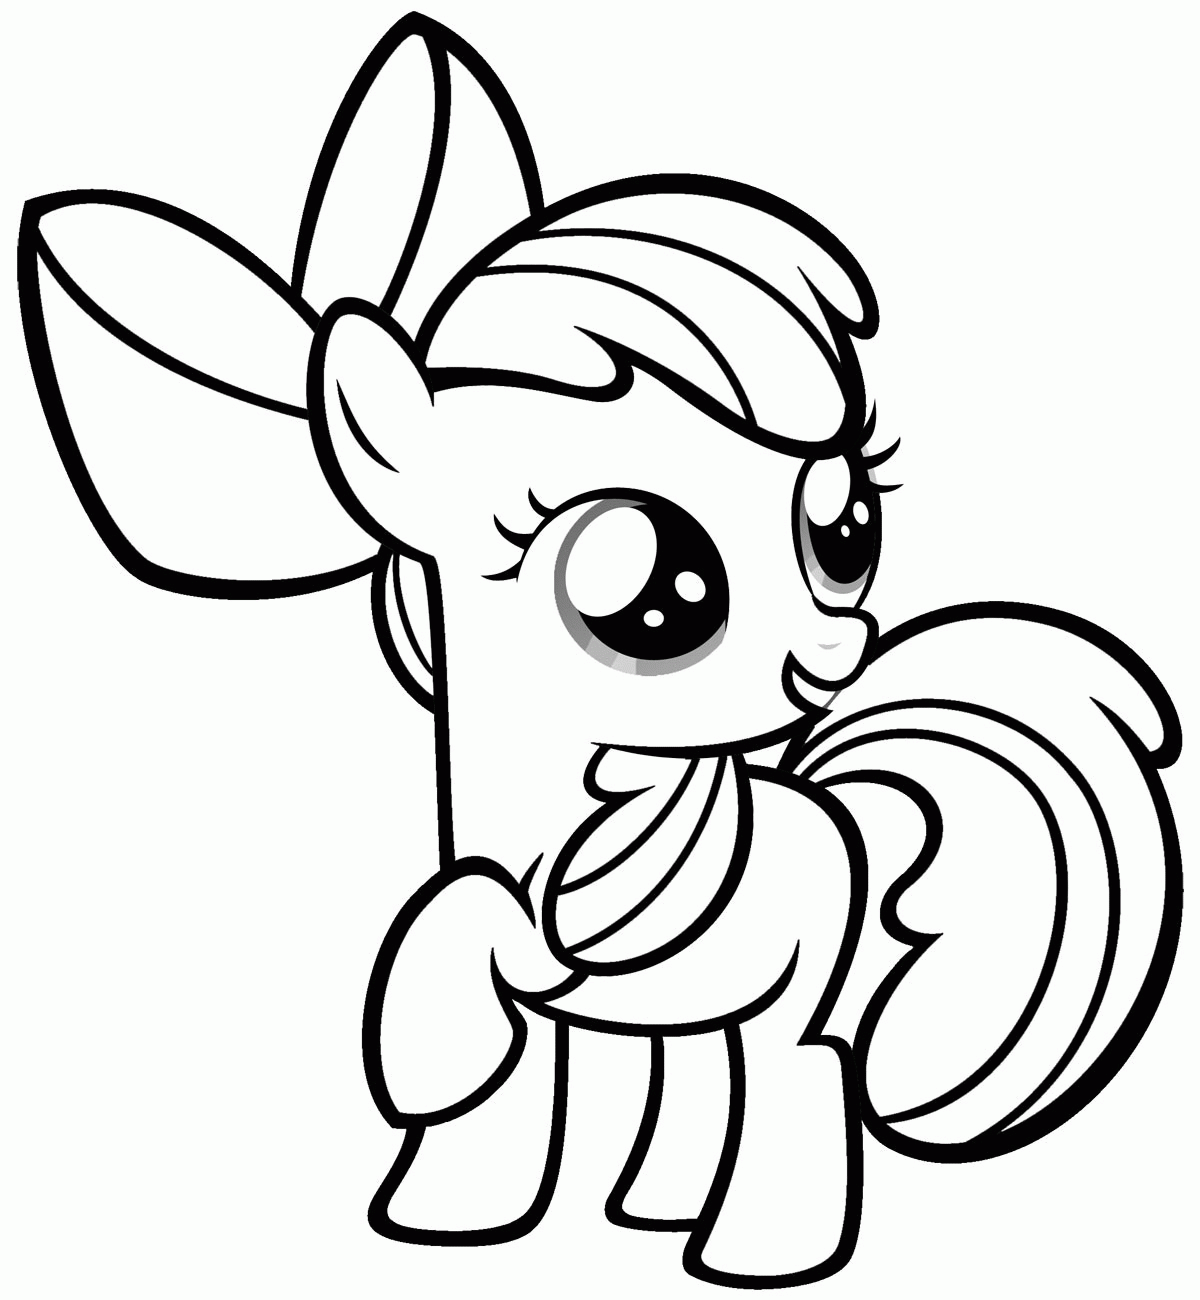 My Little Pony Coloring Pages | mugudvrlistscom